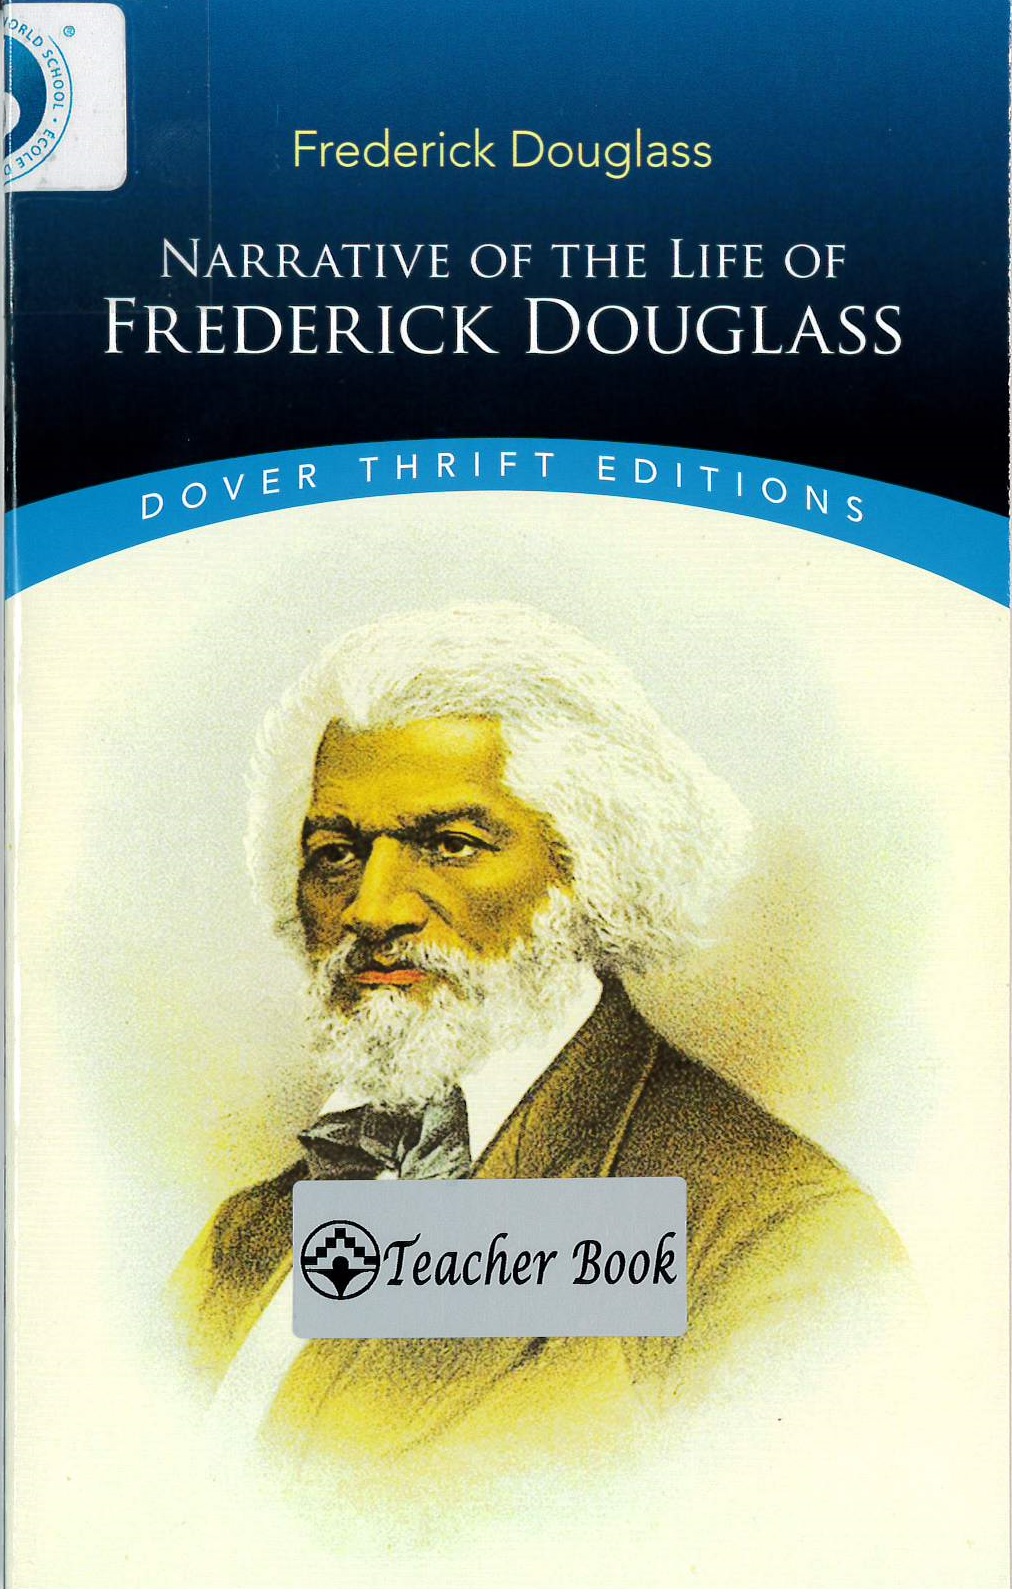 Narrative of the life of Frederick Douglass [For IB]